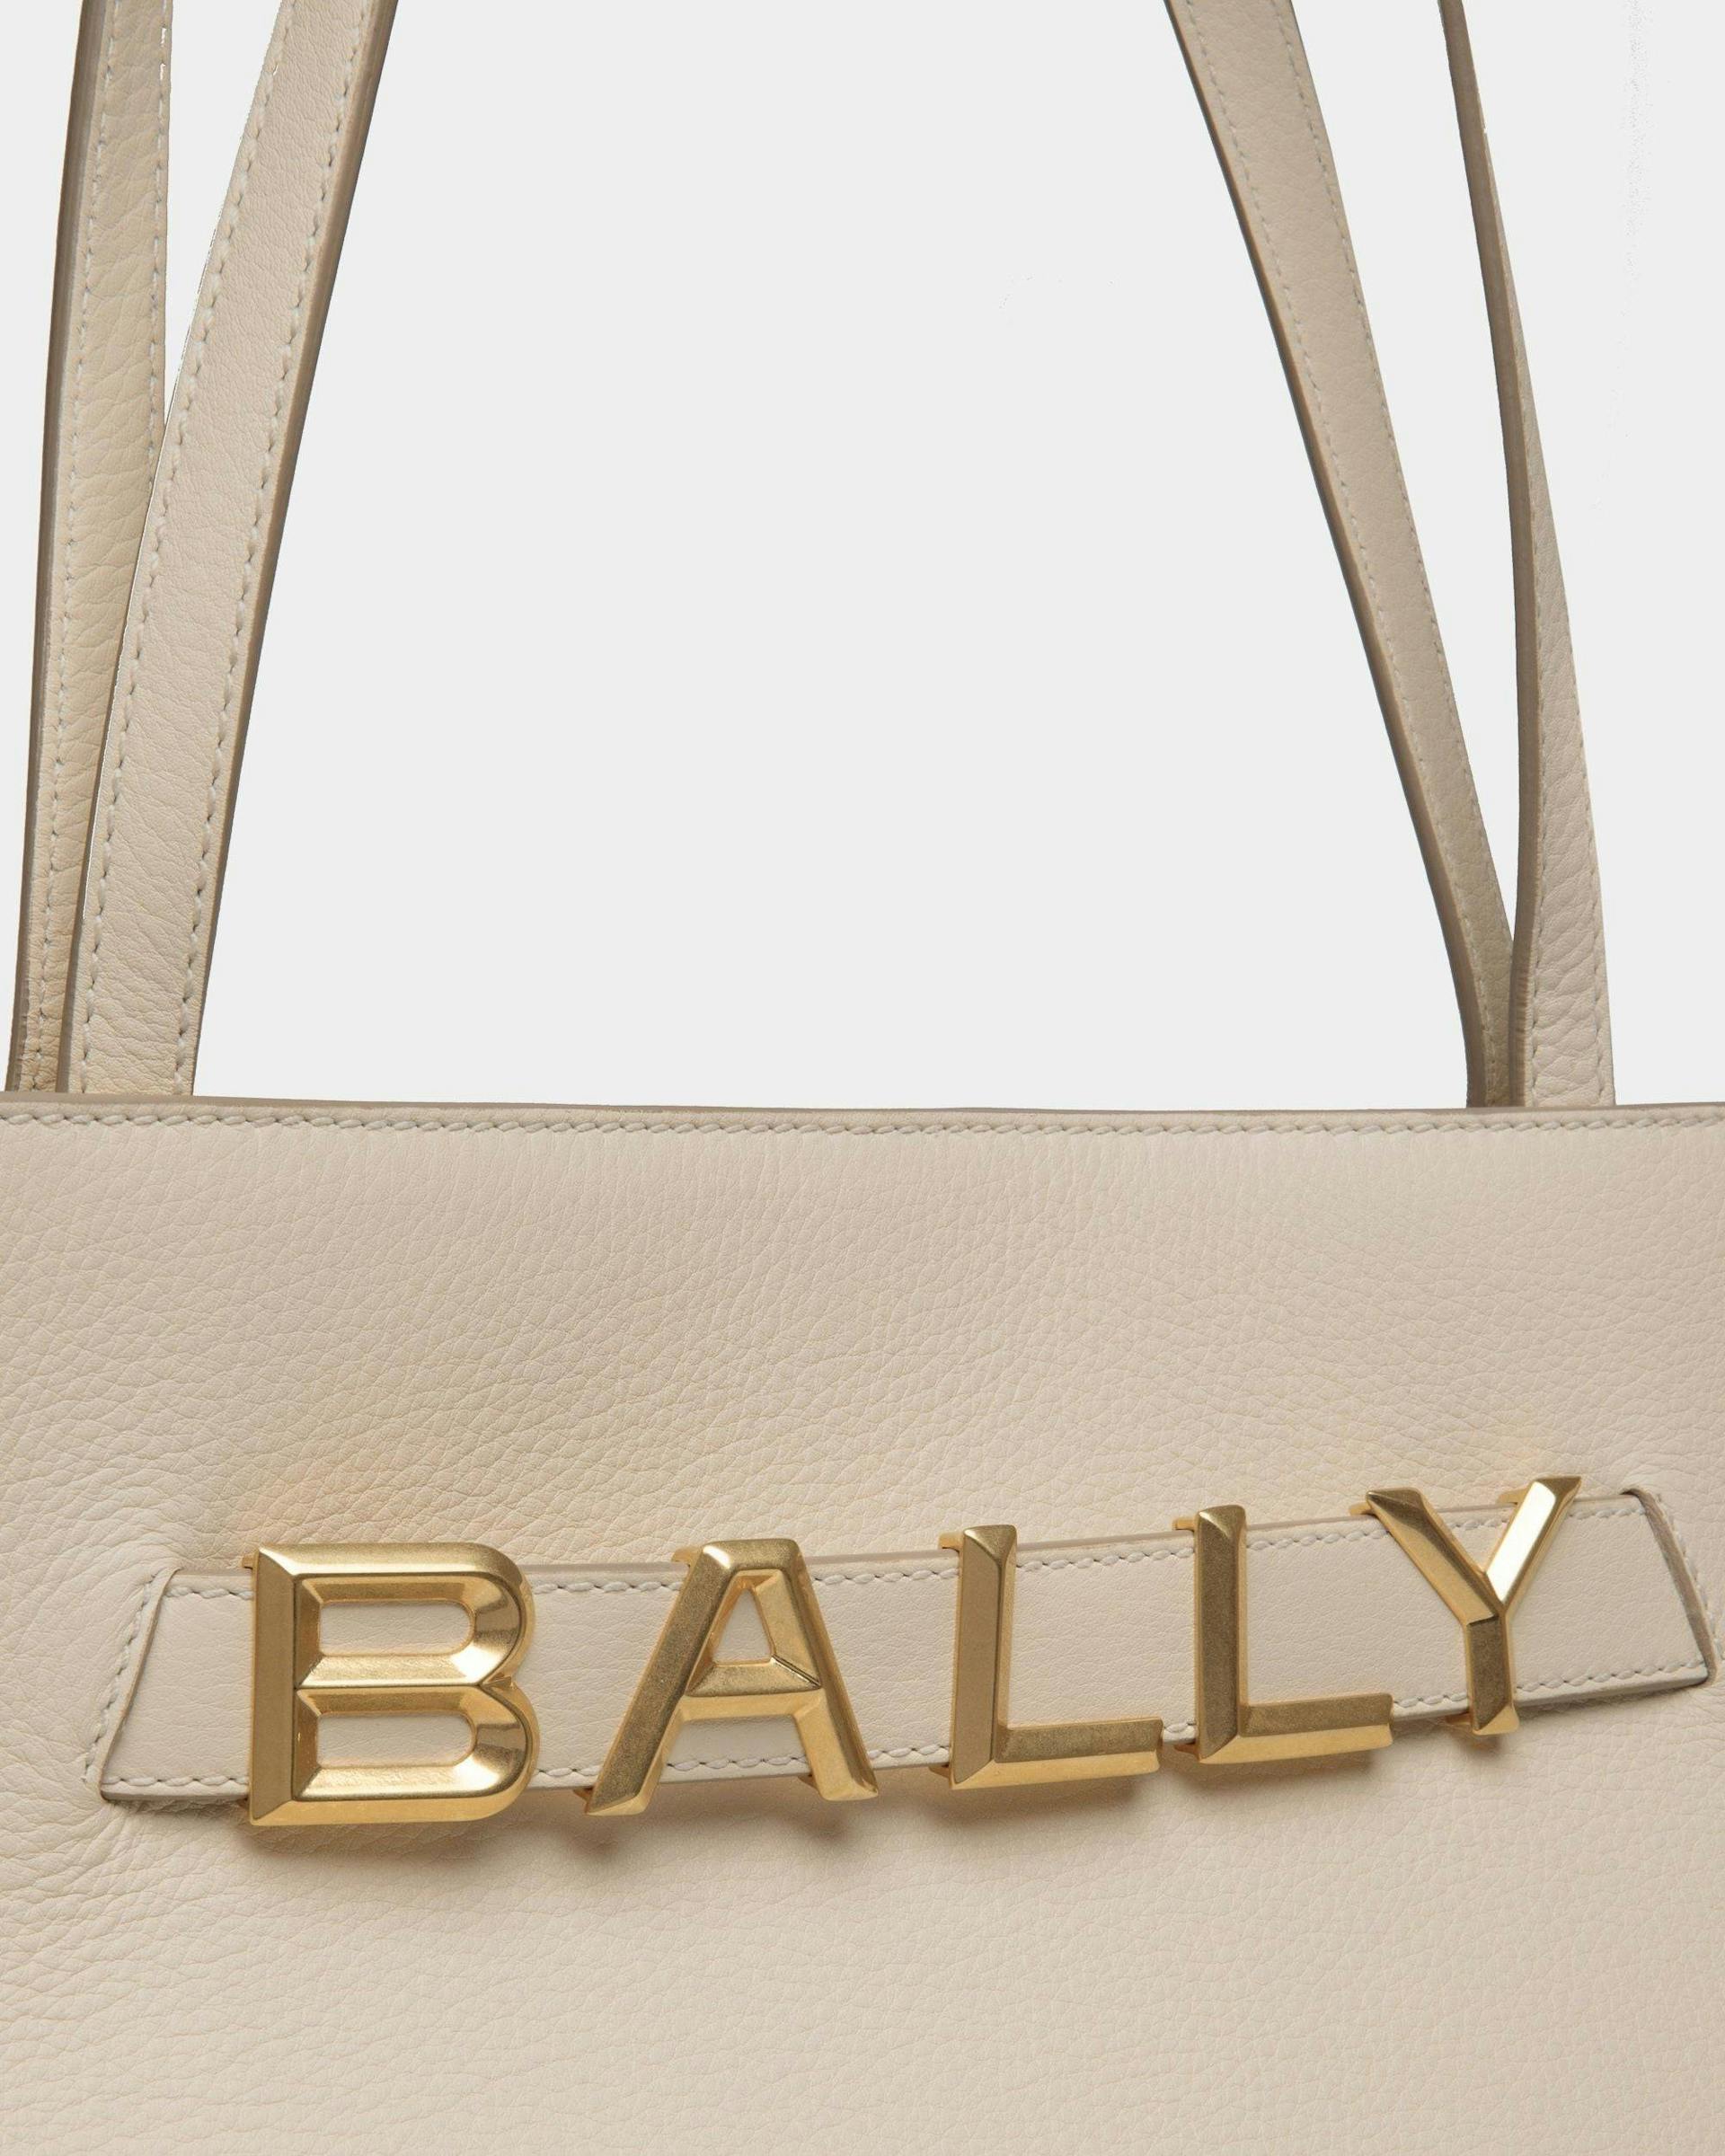 Women's Bally Spell Tote Bag in Leather | Bally | Still Life Detail